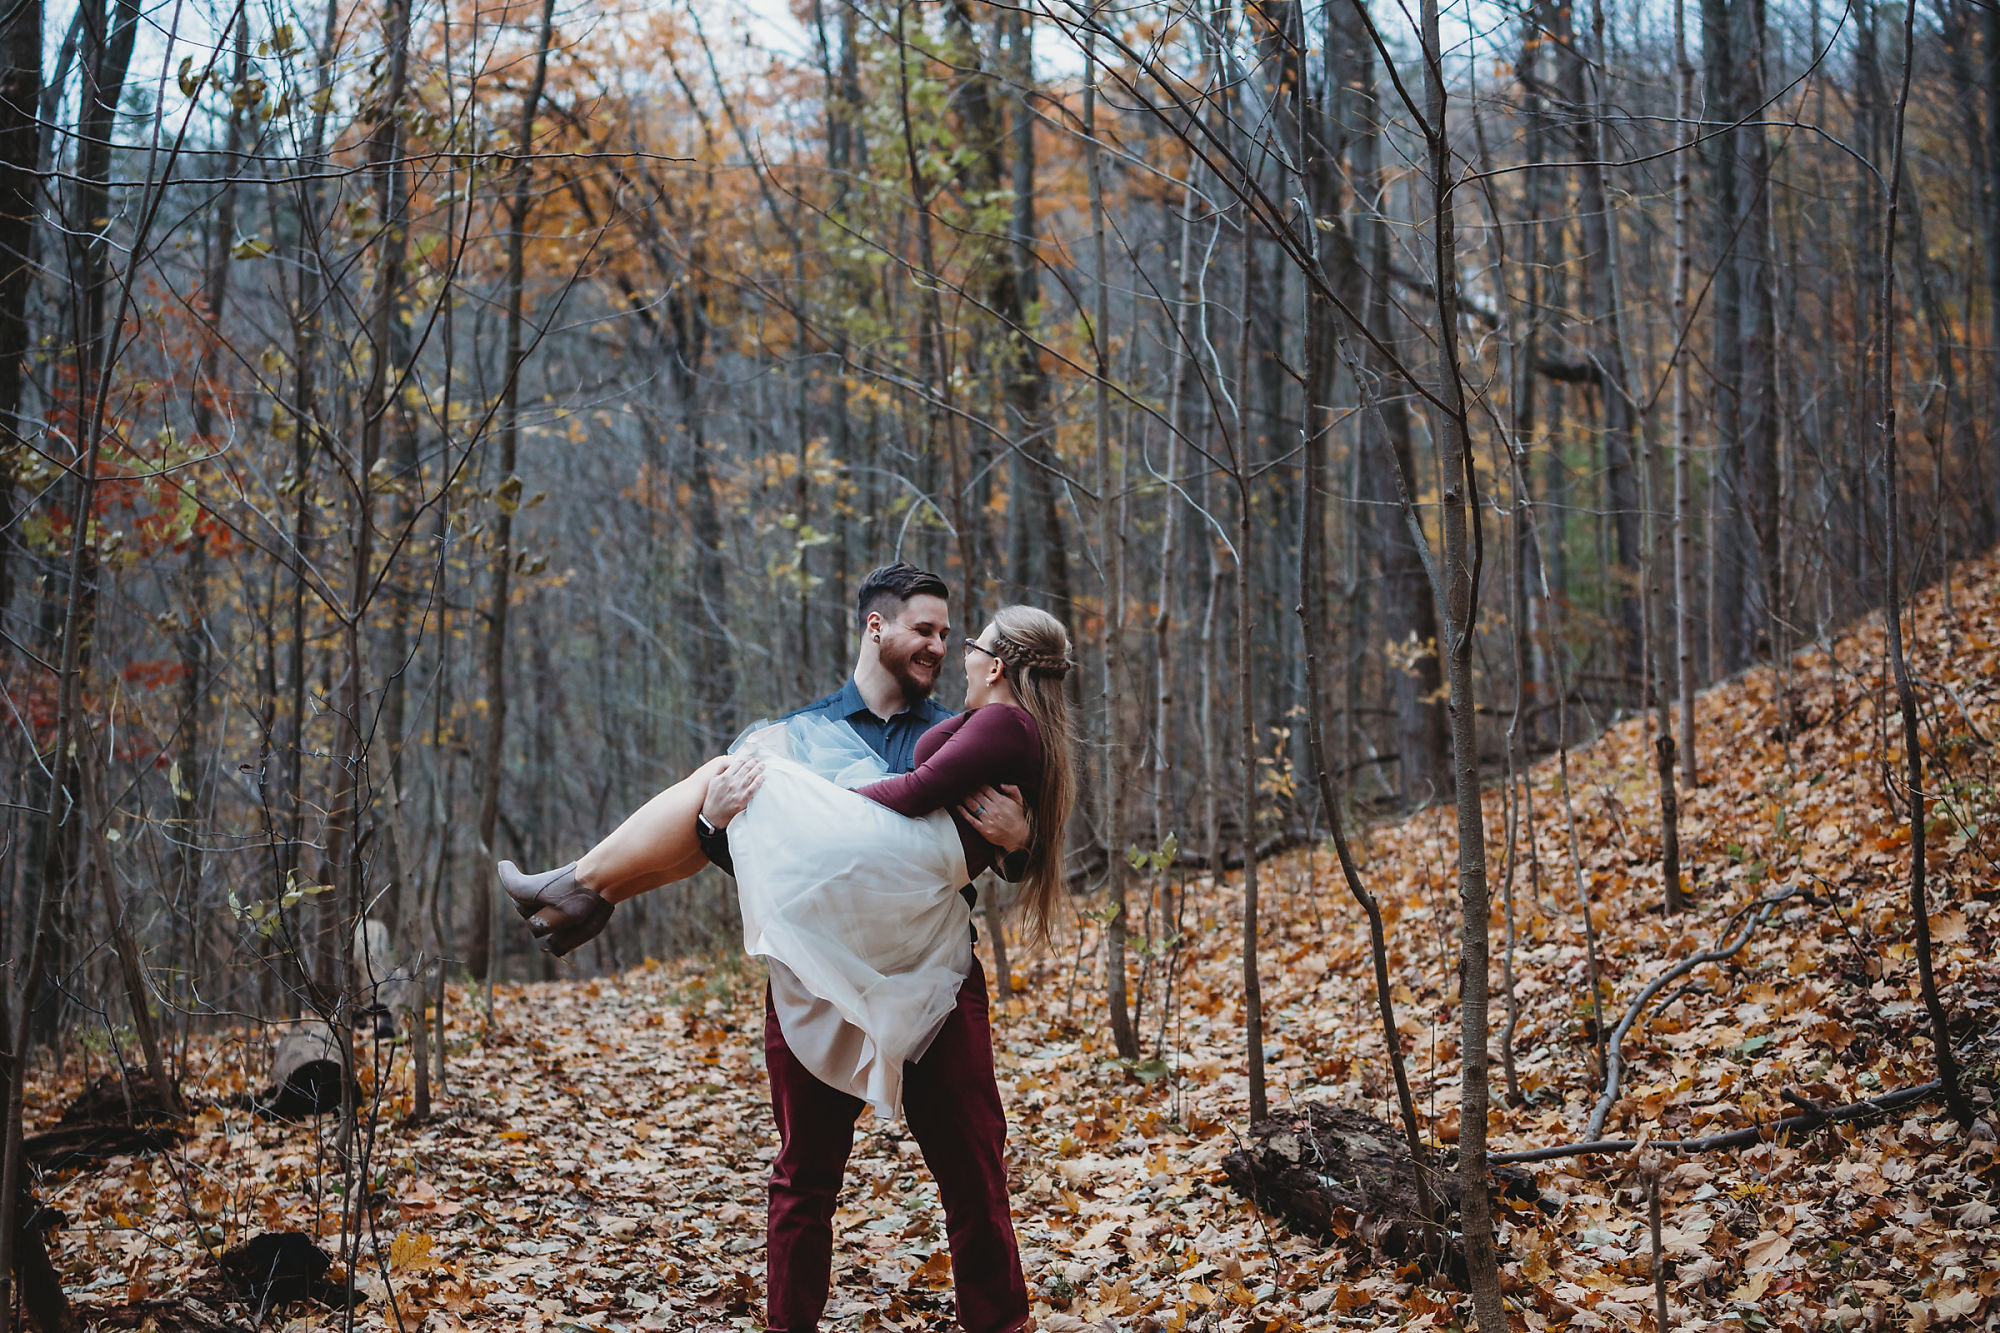 Dan sweeps Nina of her feet in a romantic embrace in the forest near Smokey Hollow Falls during their engagement session with Dundas engagement photographer Jennifer Blaak.